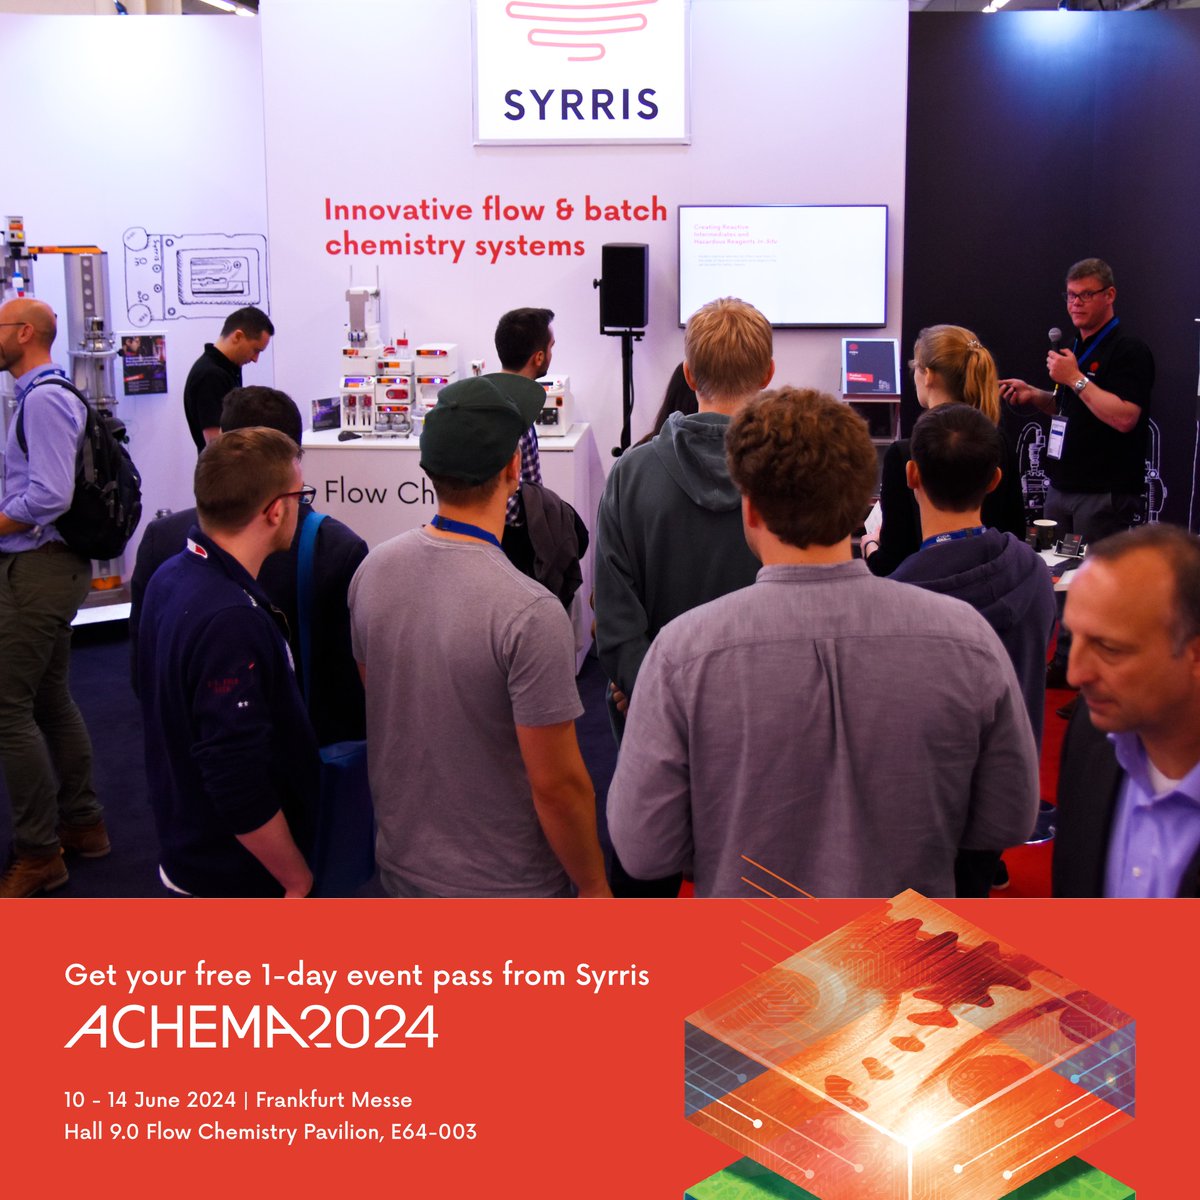 Syrris are offering free 1-day passes for #ACHEMA in Frankfurt, Germany. Available to use from 10-14 June 2024* Get your free pass: ow.ly/pMR950Rtq8e *We suggest using it on Thurs 13th so you can catch our presentation in the Flow Chemistry Symposium 😉